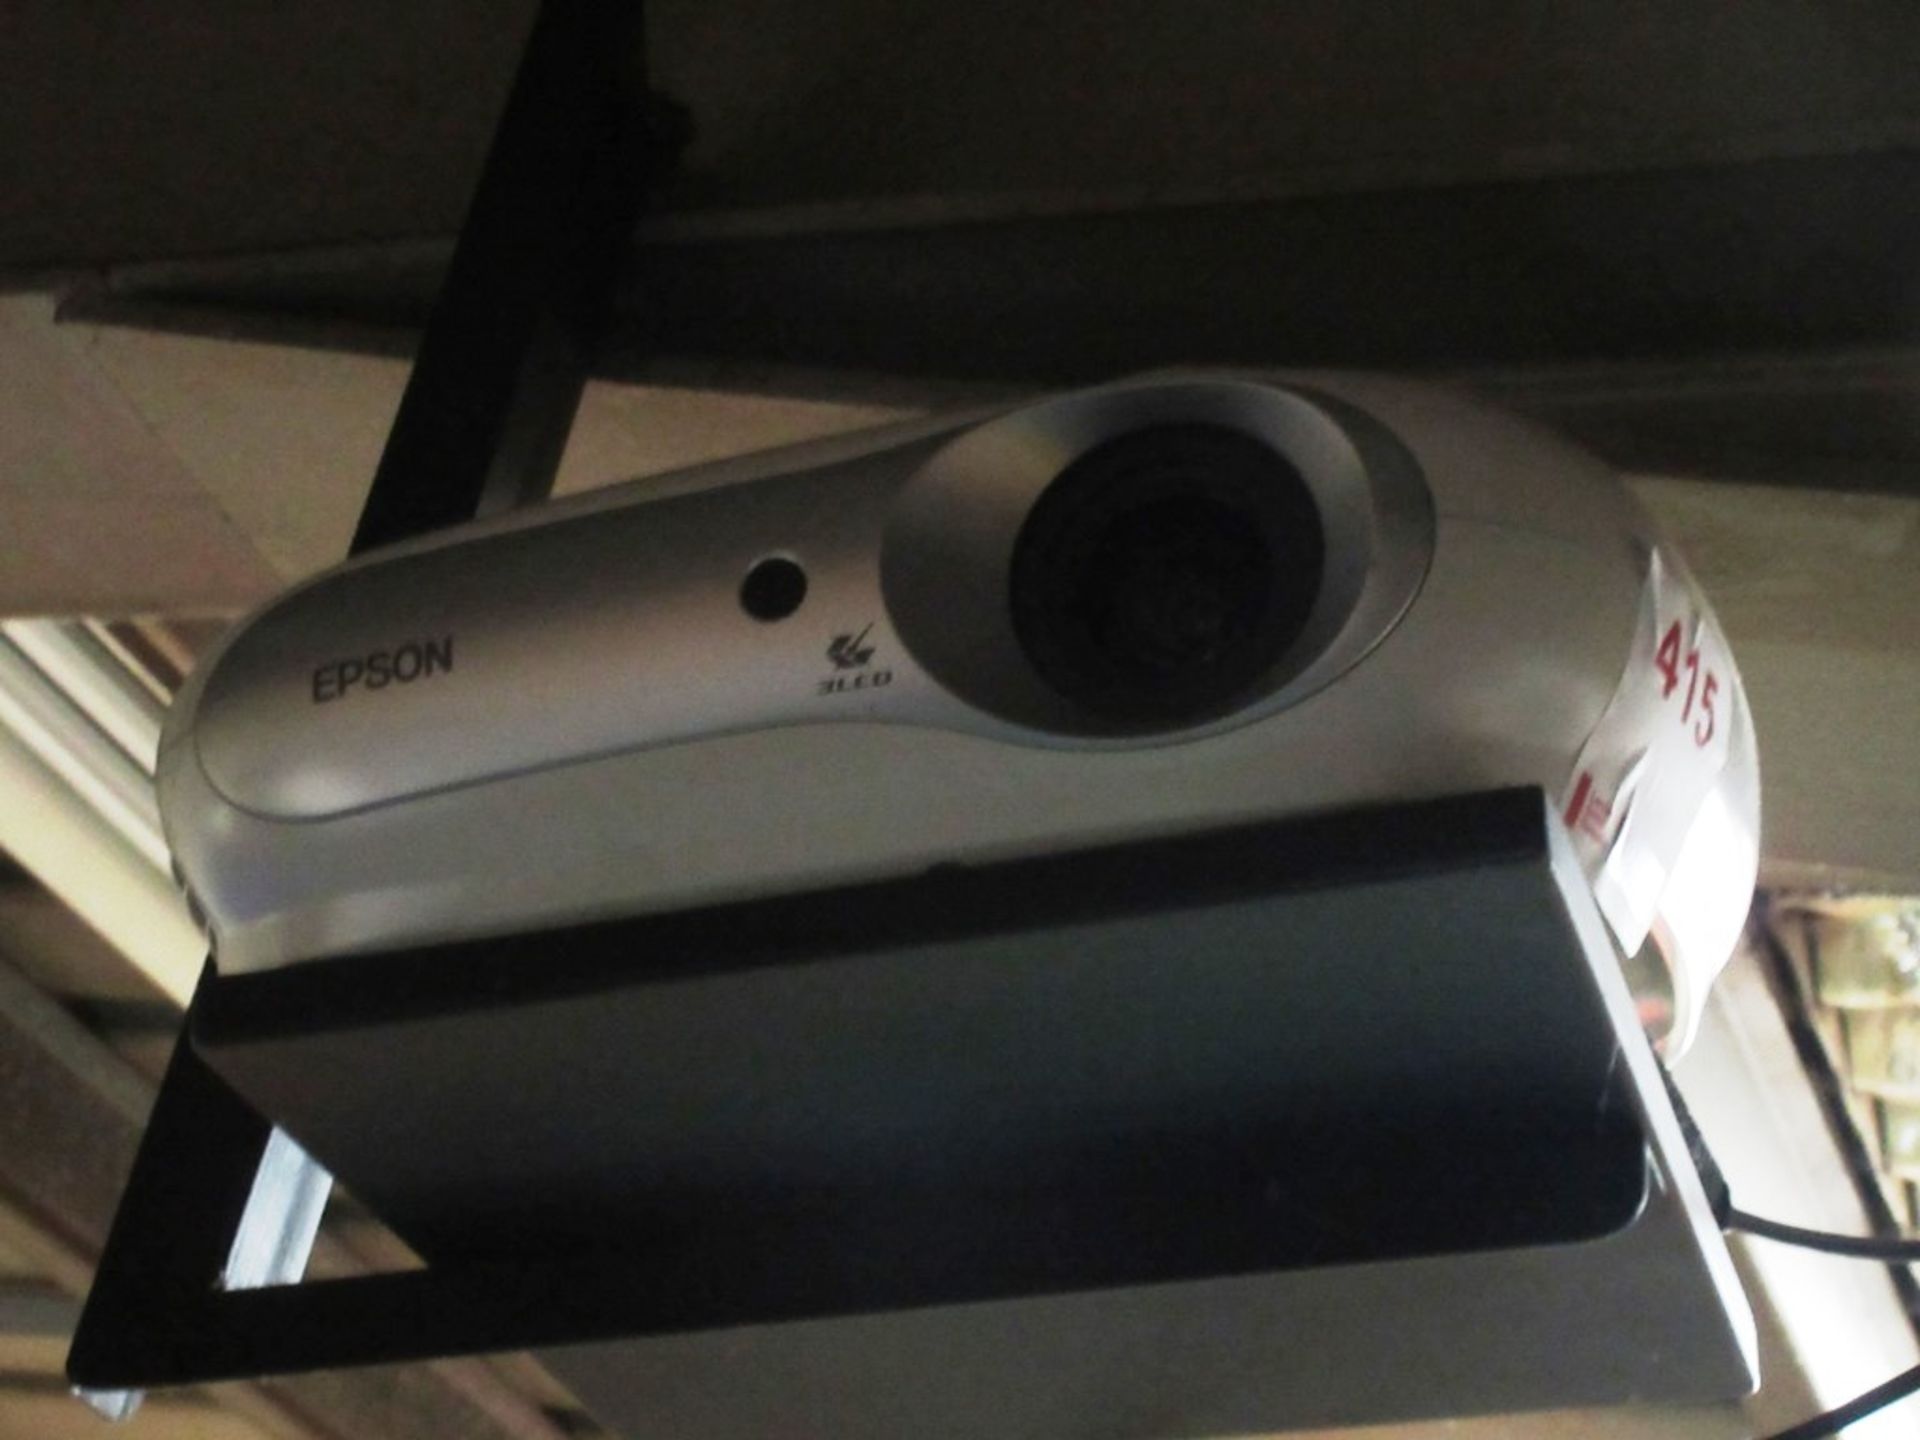 Epson ceiling mounted projector